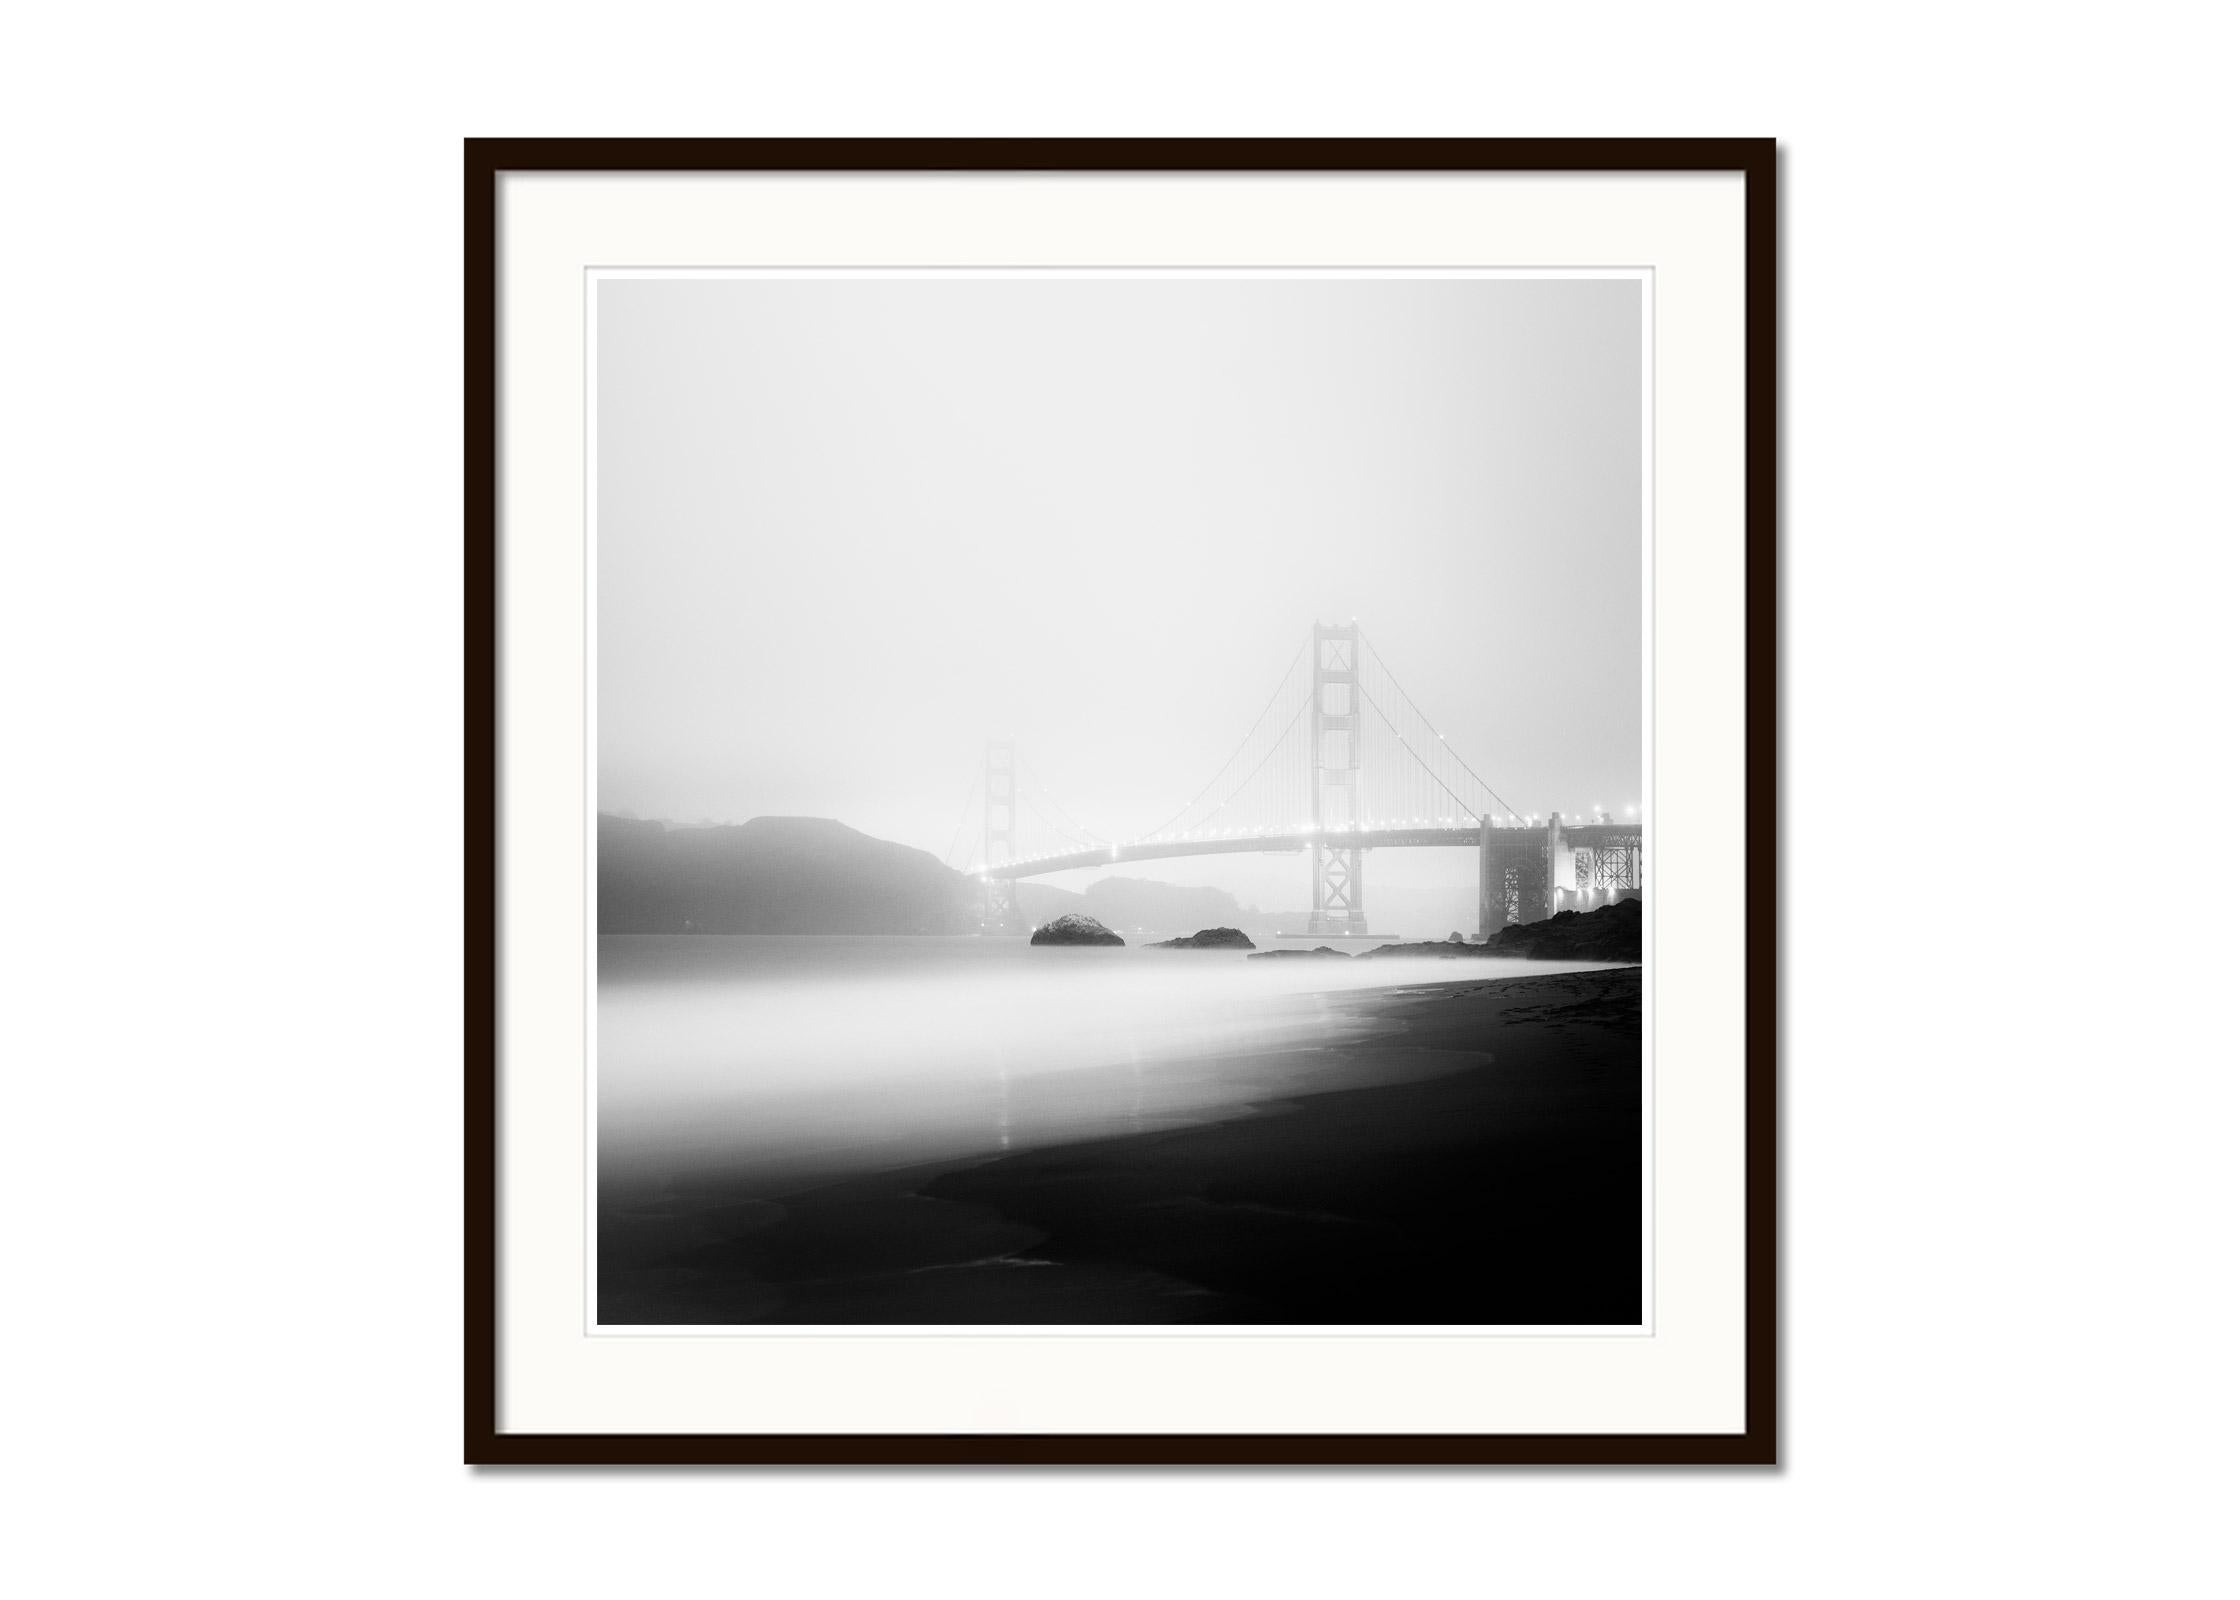 Golden Gate Bridge, foggy, night, USA, black and white photography, landscape - Gray Landscape Photograph by Gerald Berghammer